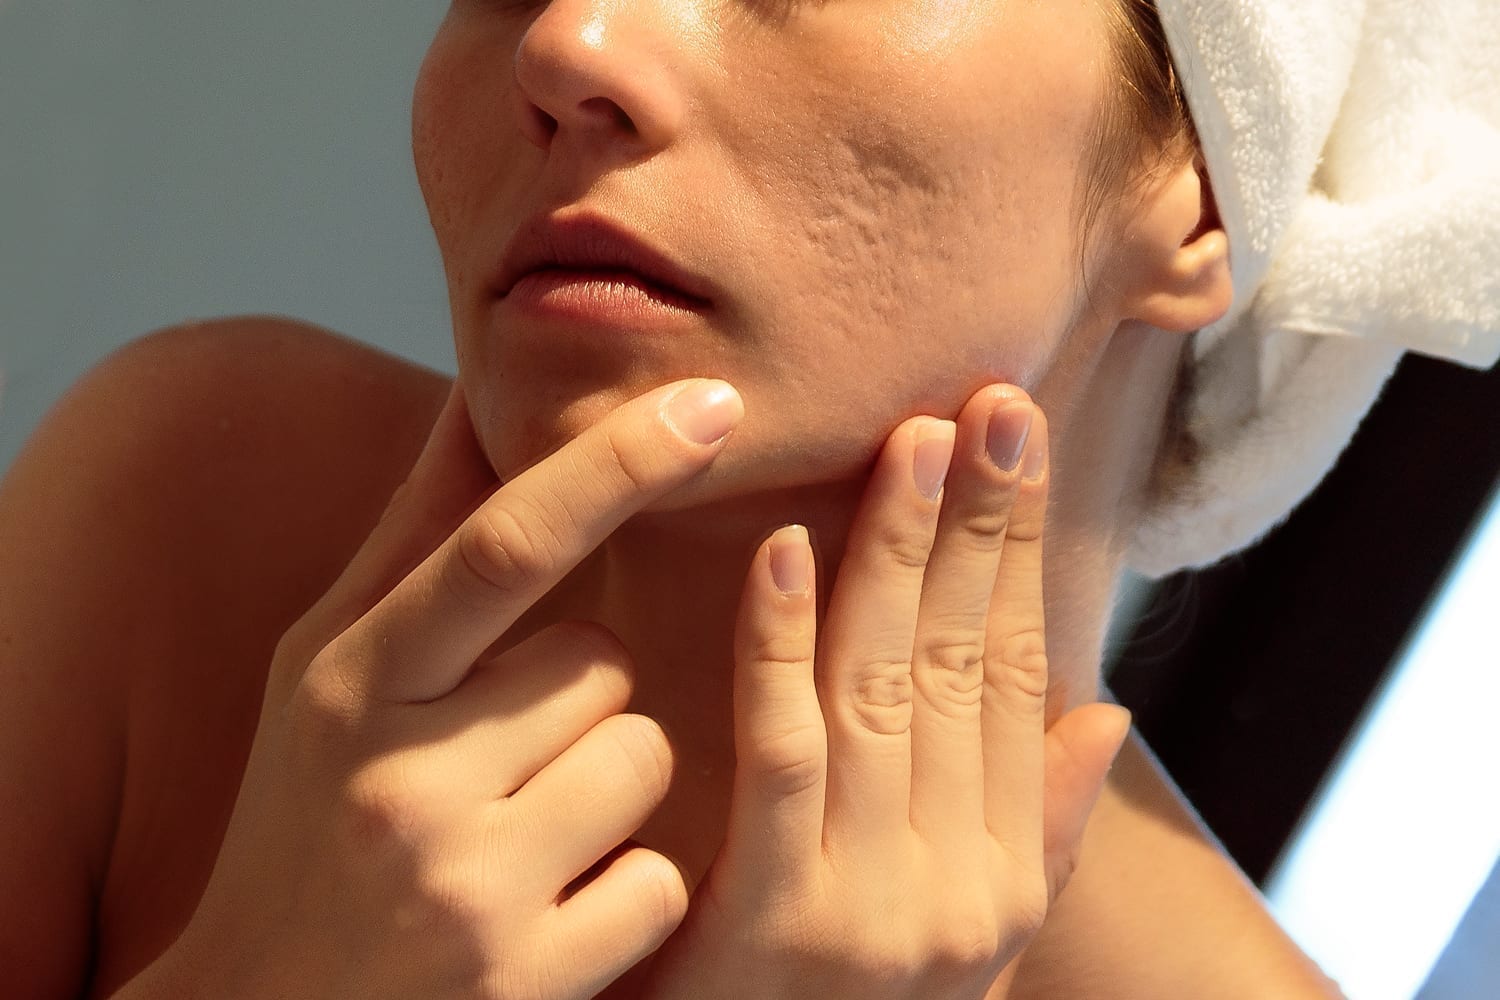 A woman with acne scars looks at her skin in the mirror.